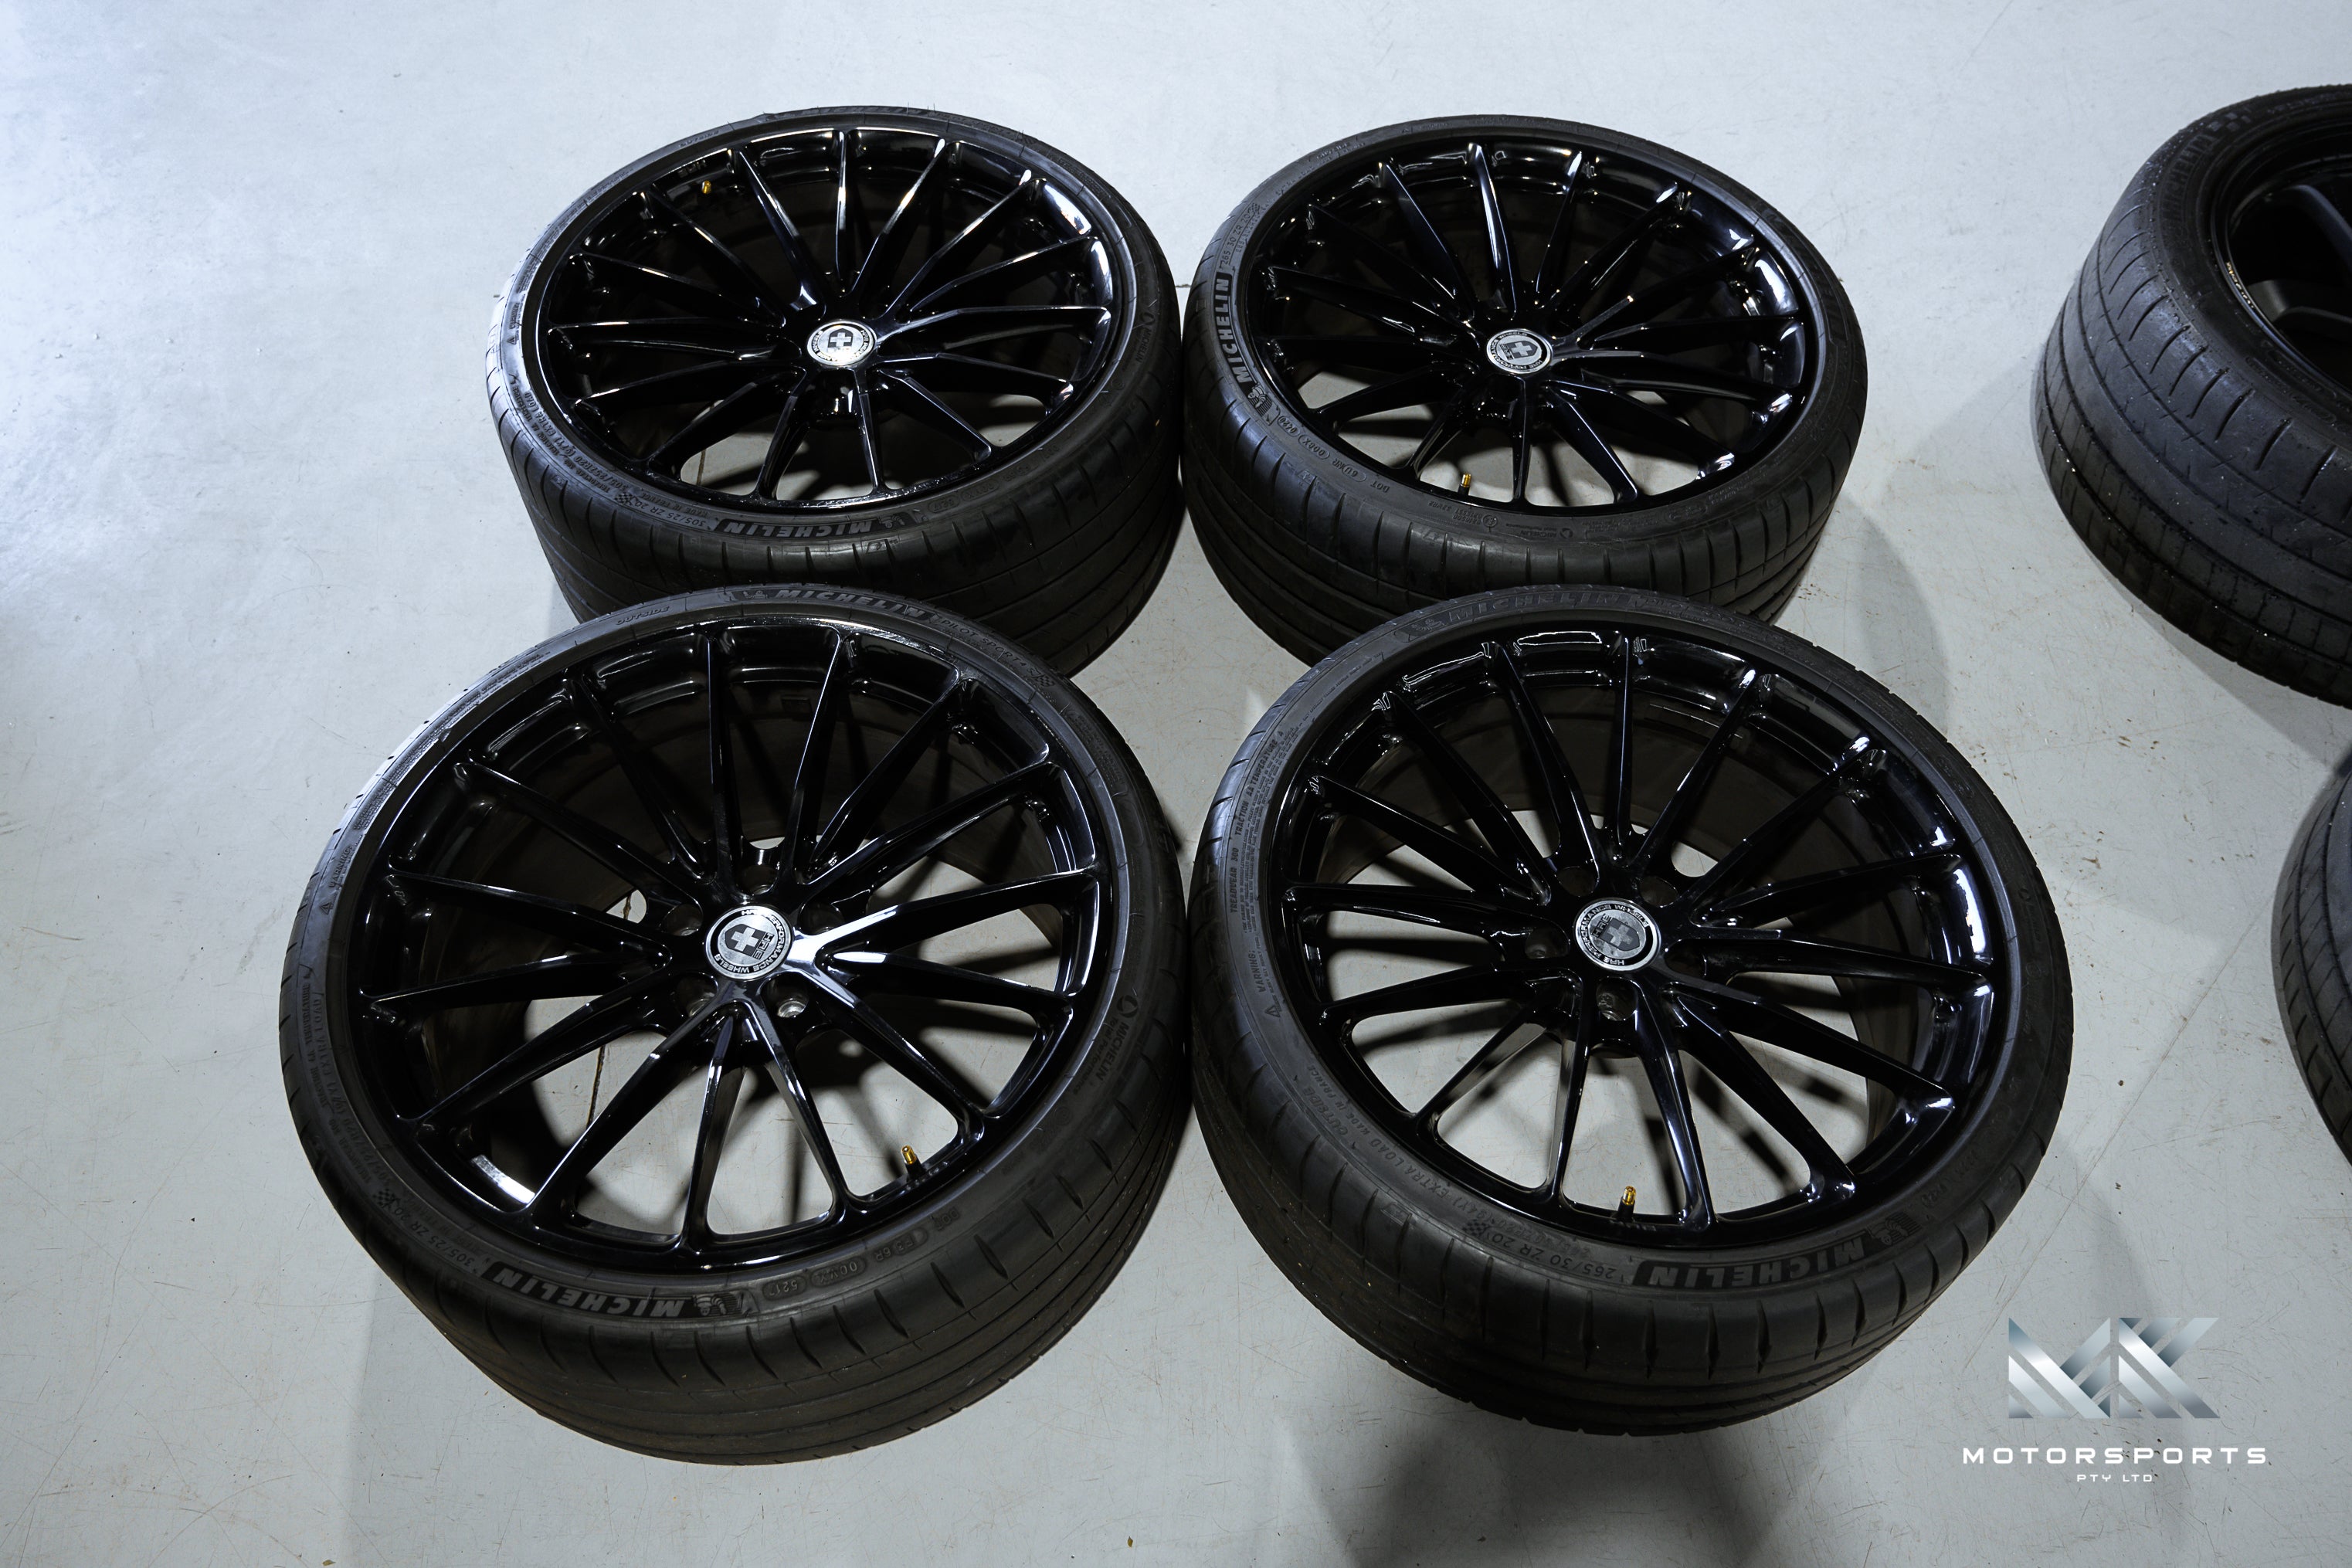 HRE-P103 20" (5x112) - Premium Wheels from Used Wheels - From just $7799.00! Shop now at MK MOTORSPORTS